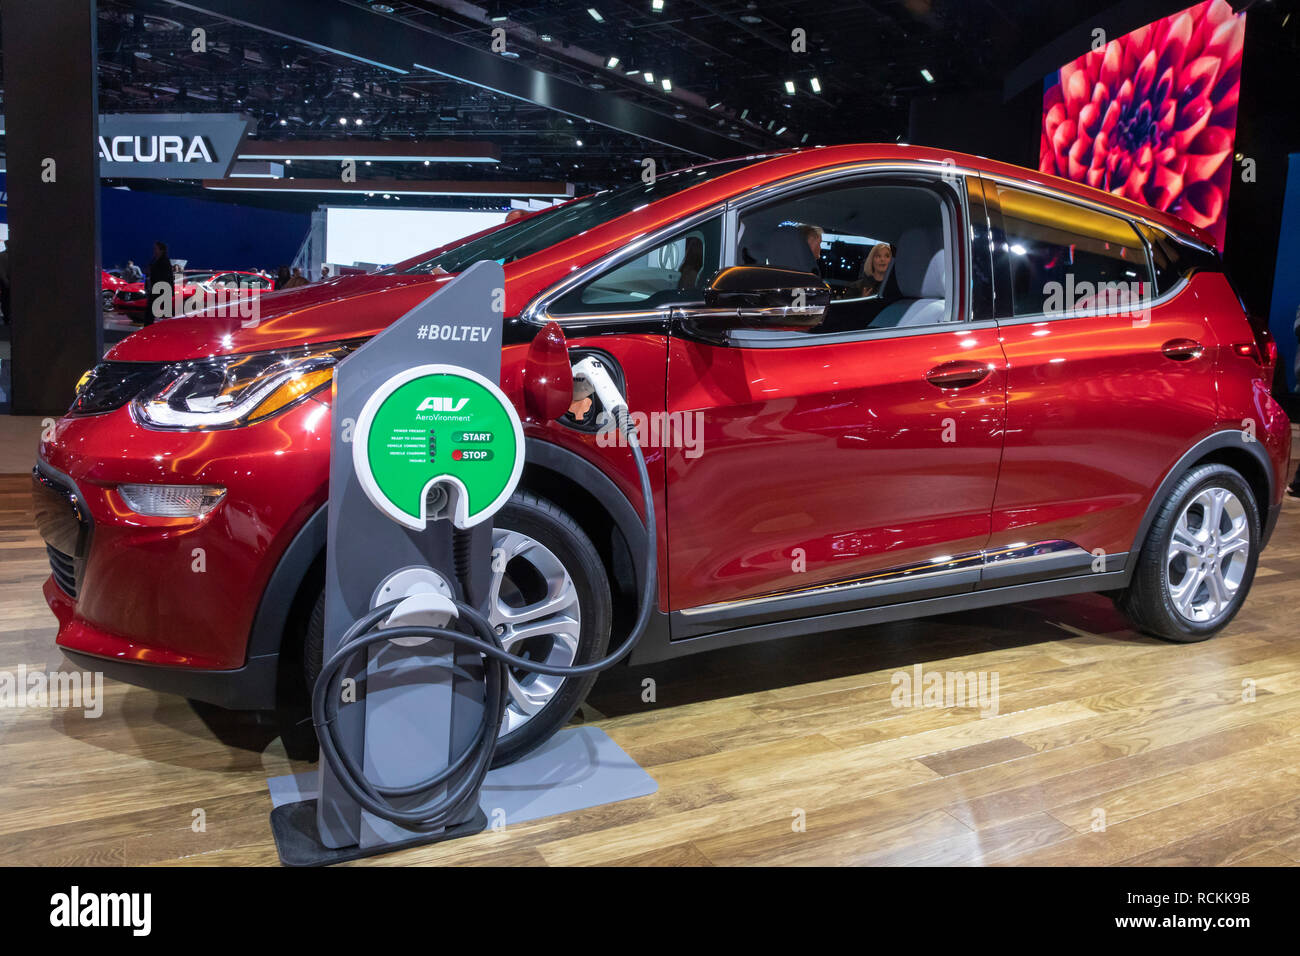 Detroit, Michigan - The Chevrolet Bolt electric car on display at the North American International Auto Show. Stock Photo